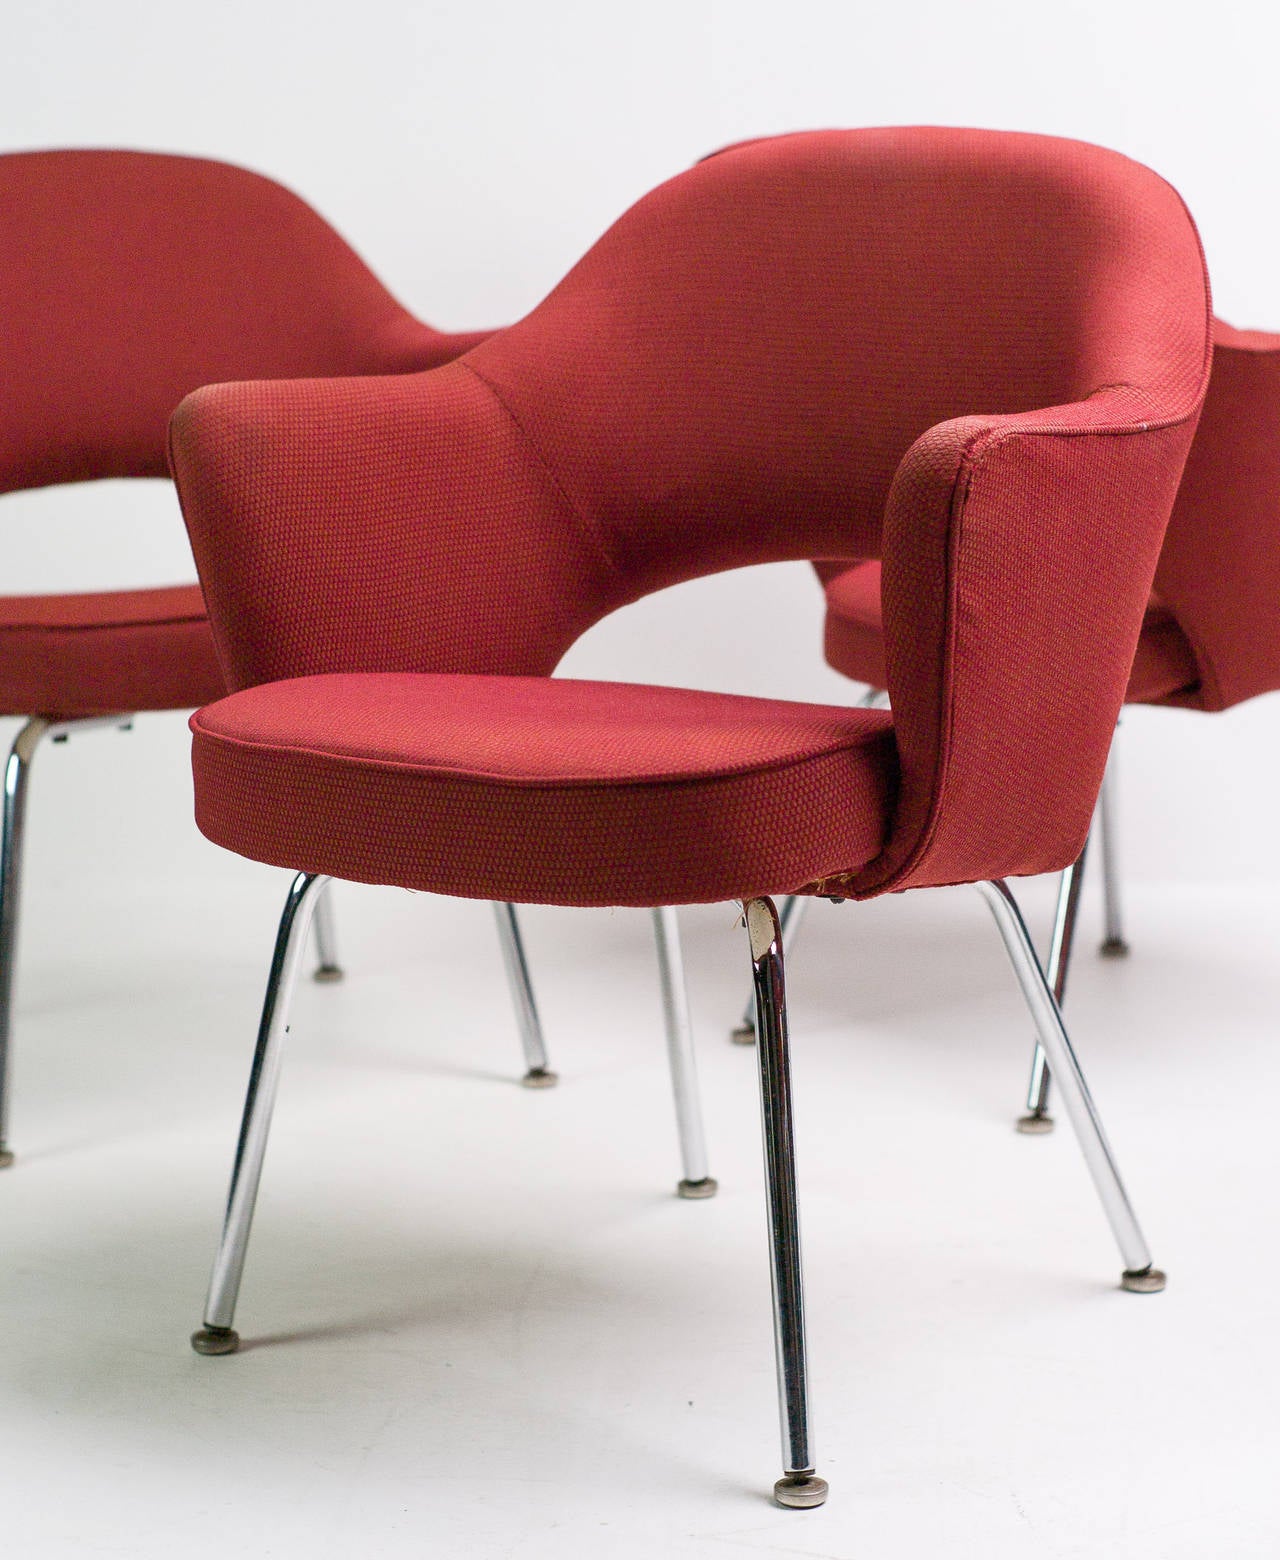 Set of six executive armchairs by Eero Saarinen for Knoll.
Great all original condition, marked with metal label.

Expertly packed insured worldwide shipping available at very competitive rates.
Check it out at shipping and returns.